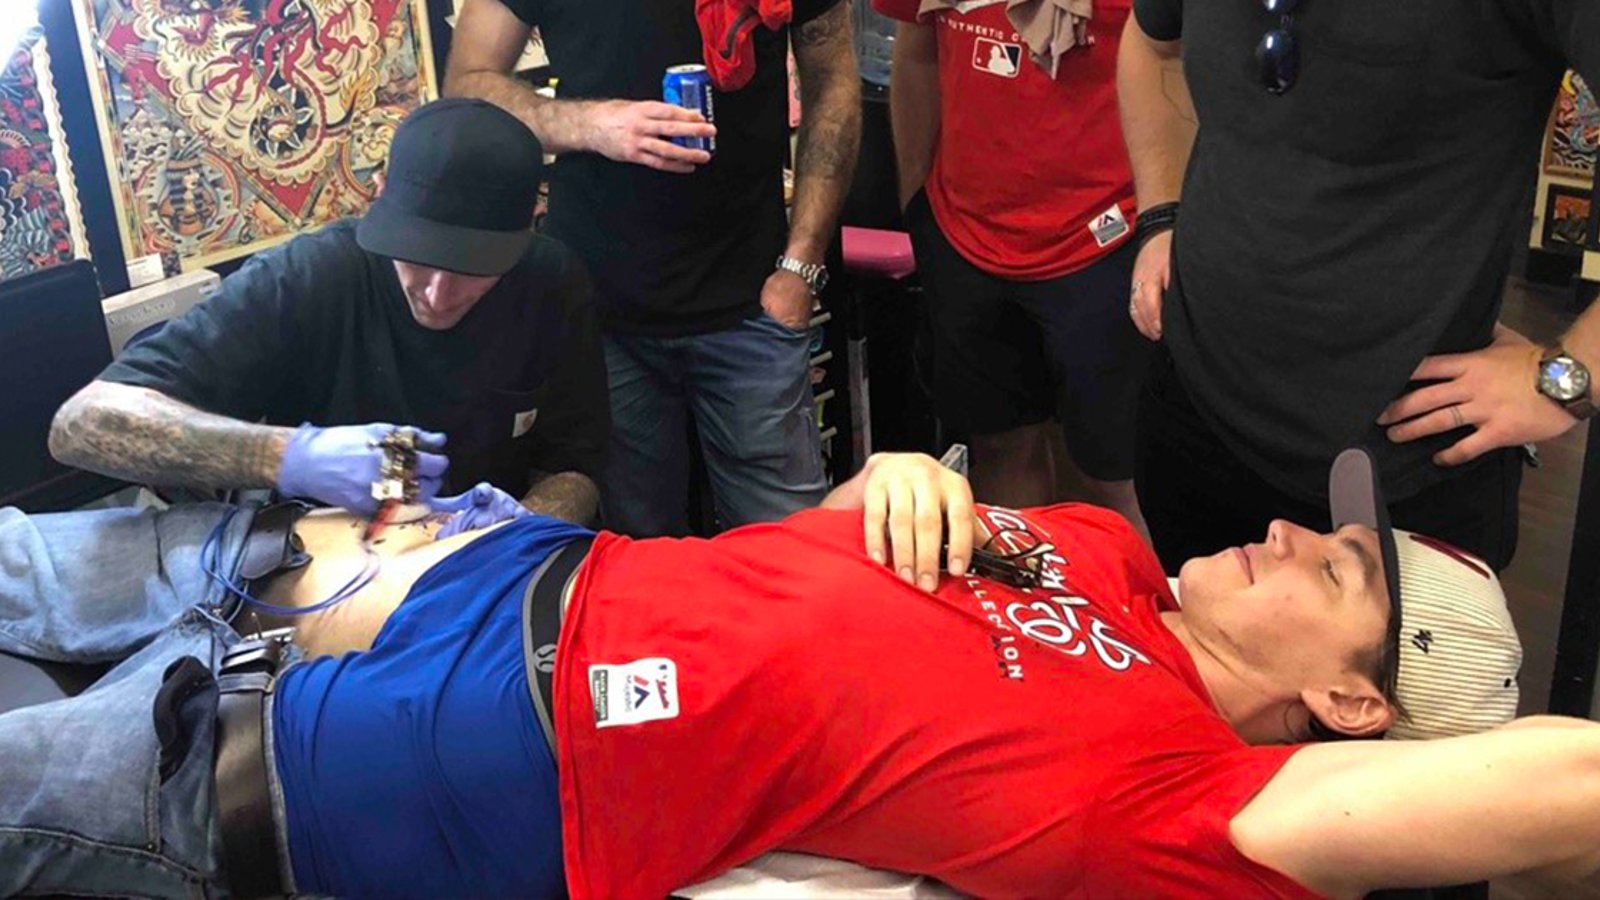 The story of how a drunken T.J. Oshie got a Mario Kart tattoo after winning the Stanley Cup